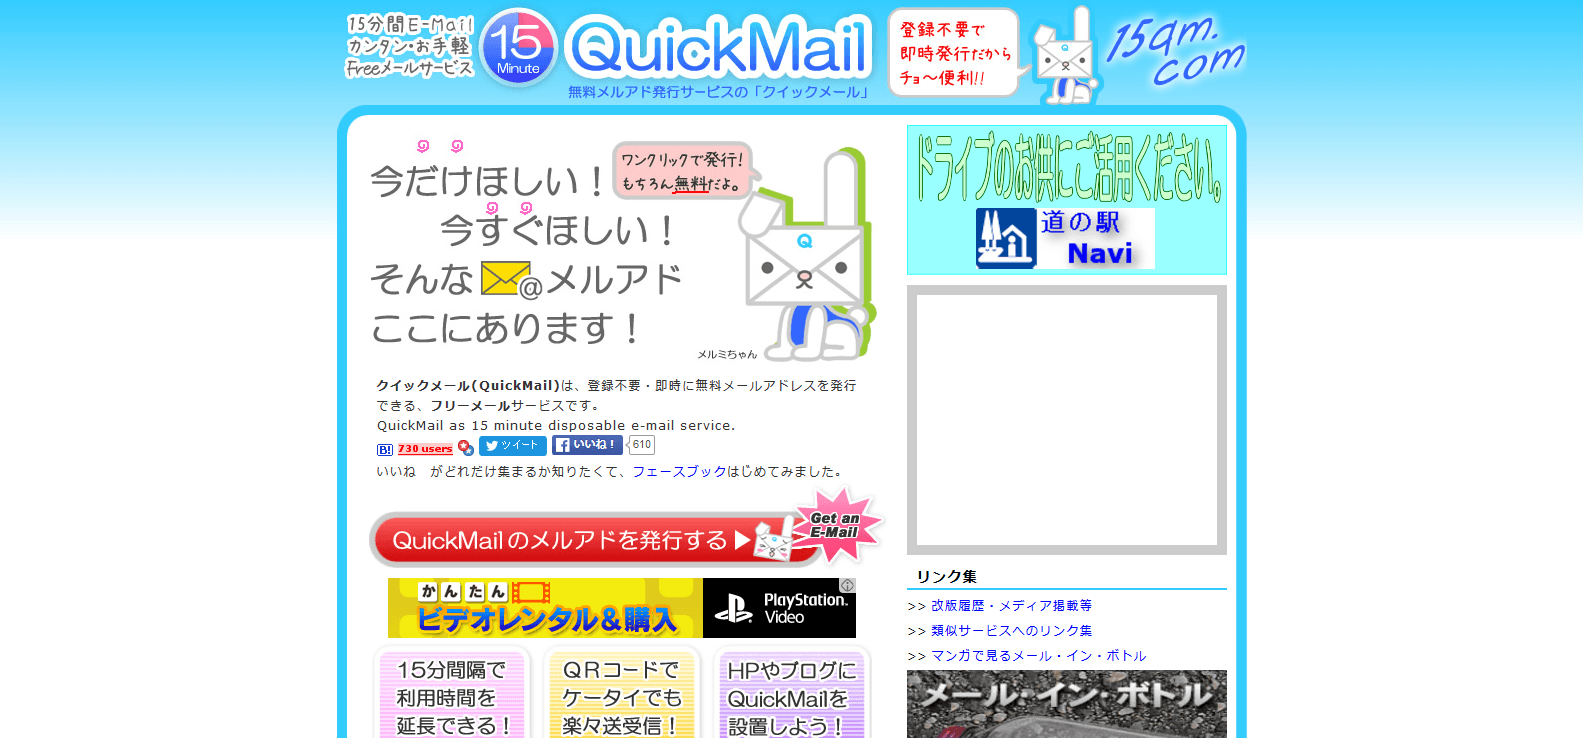 QuickMail